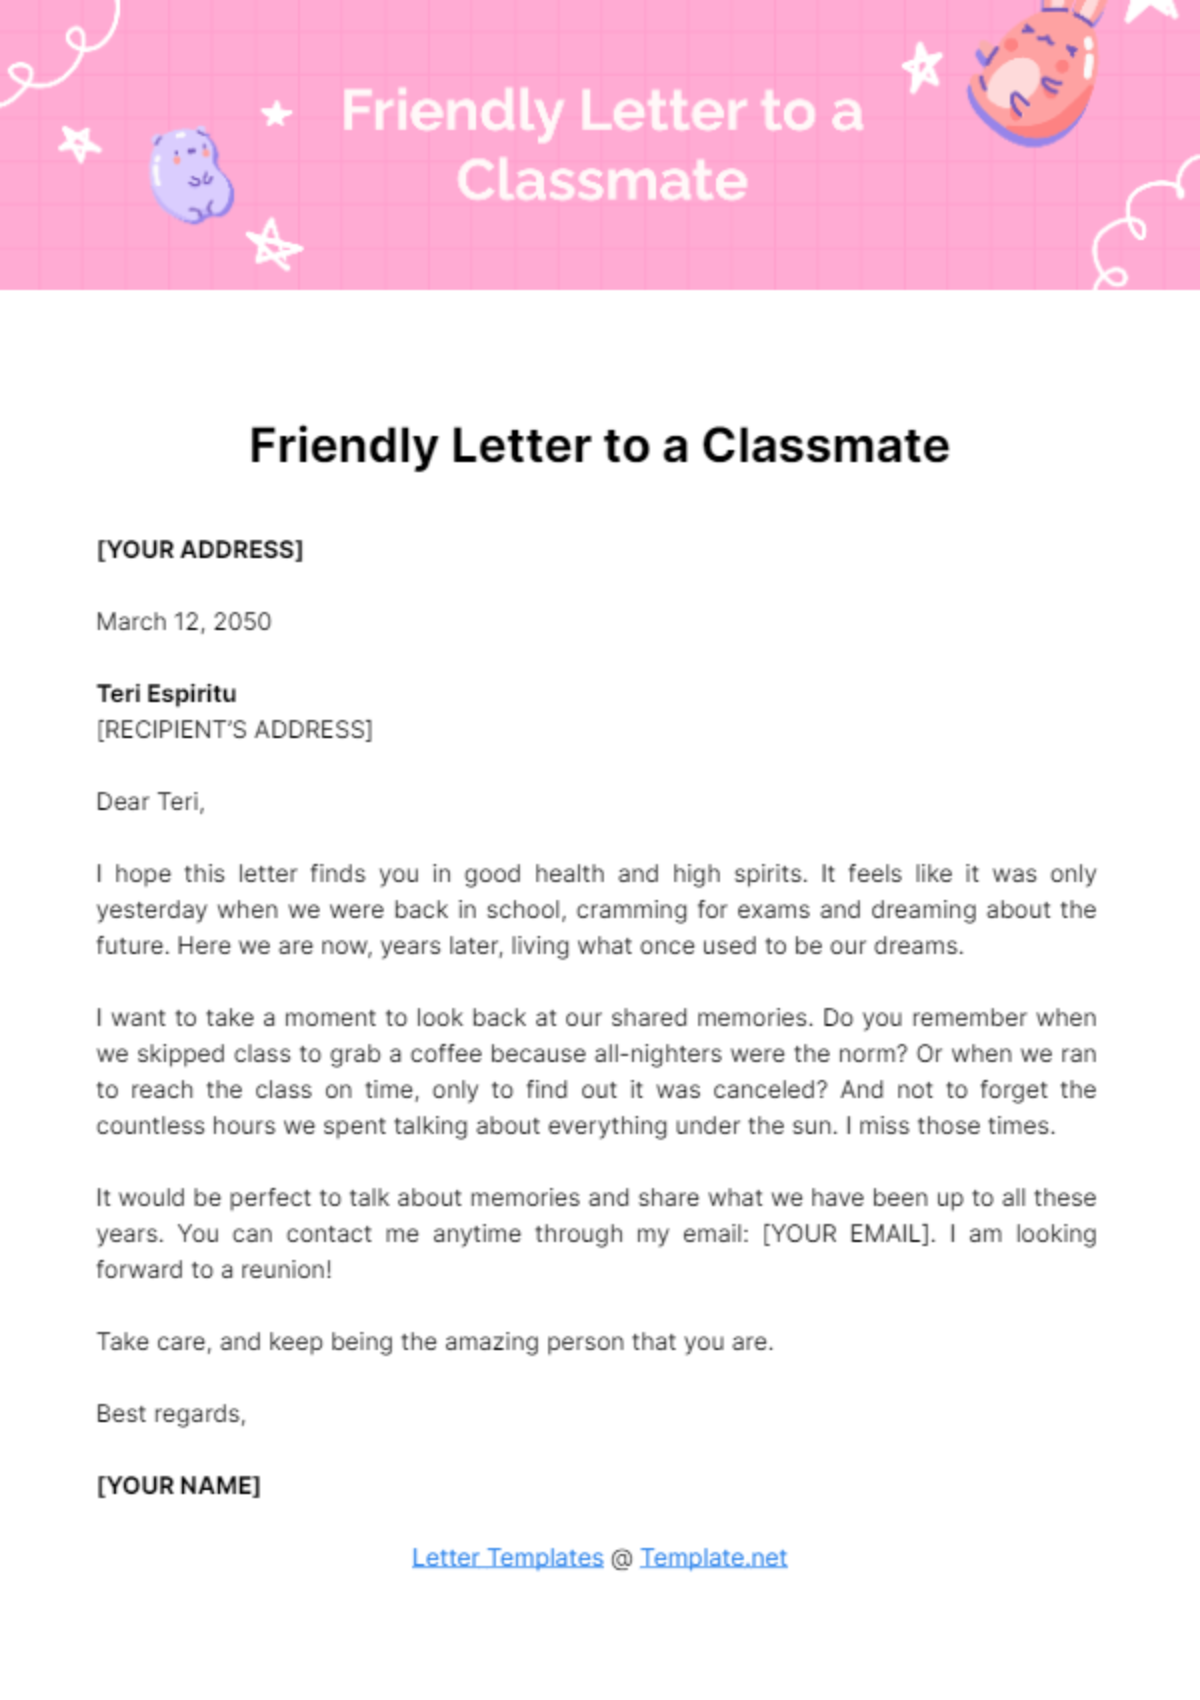 Friendly Letter to a Classmate Template